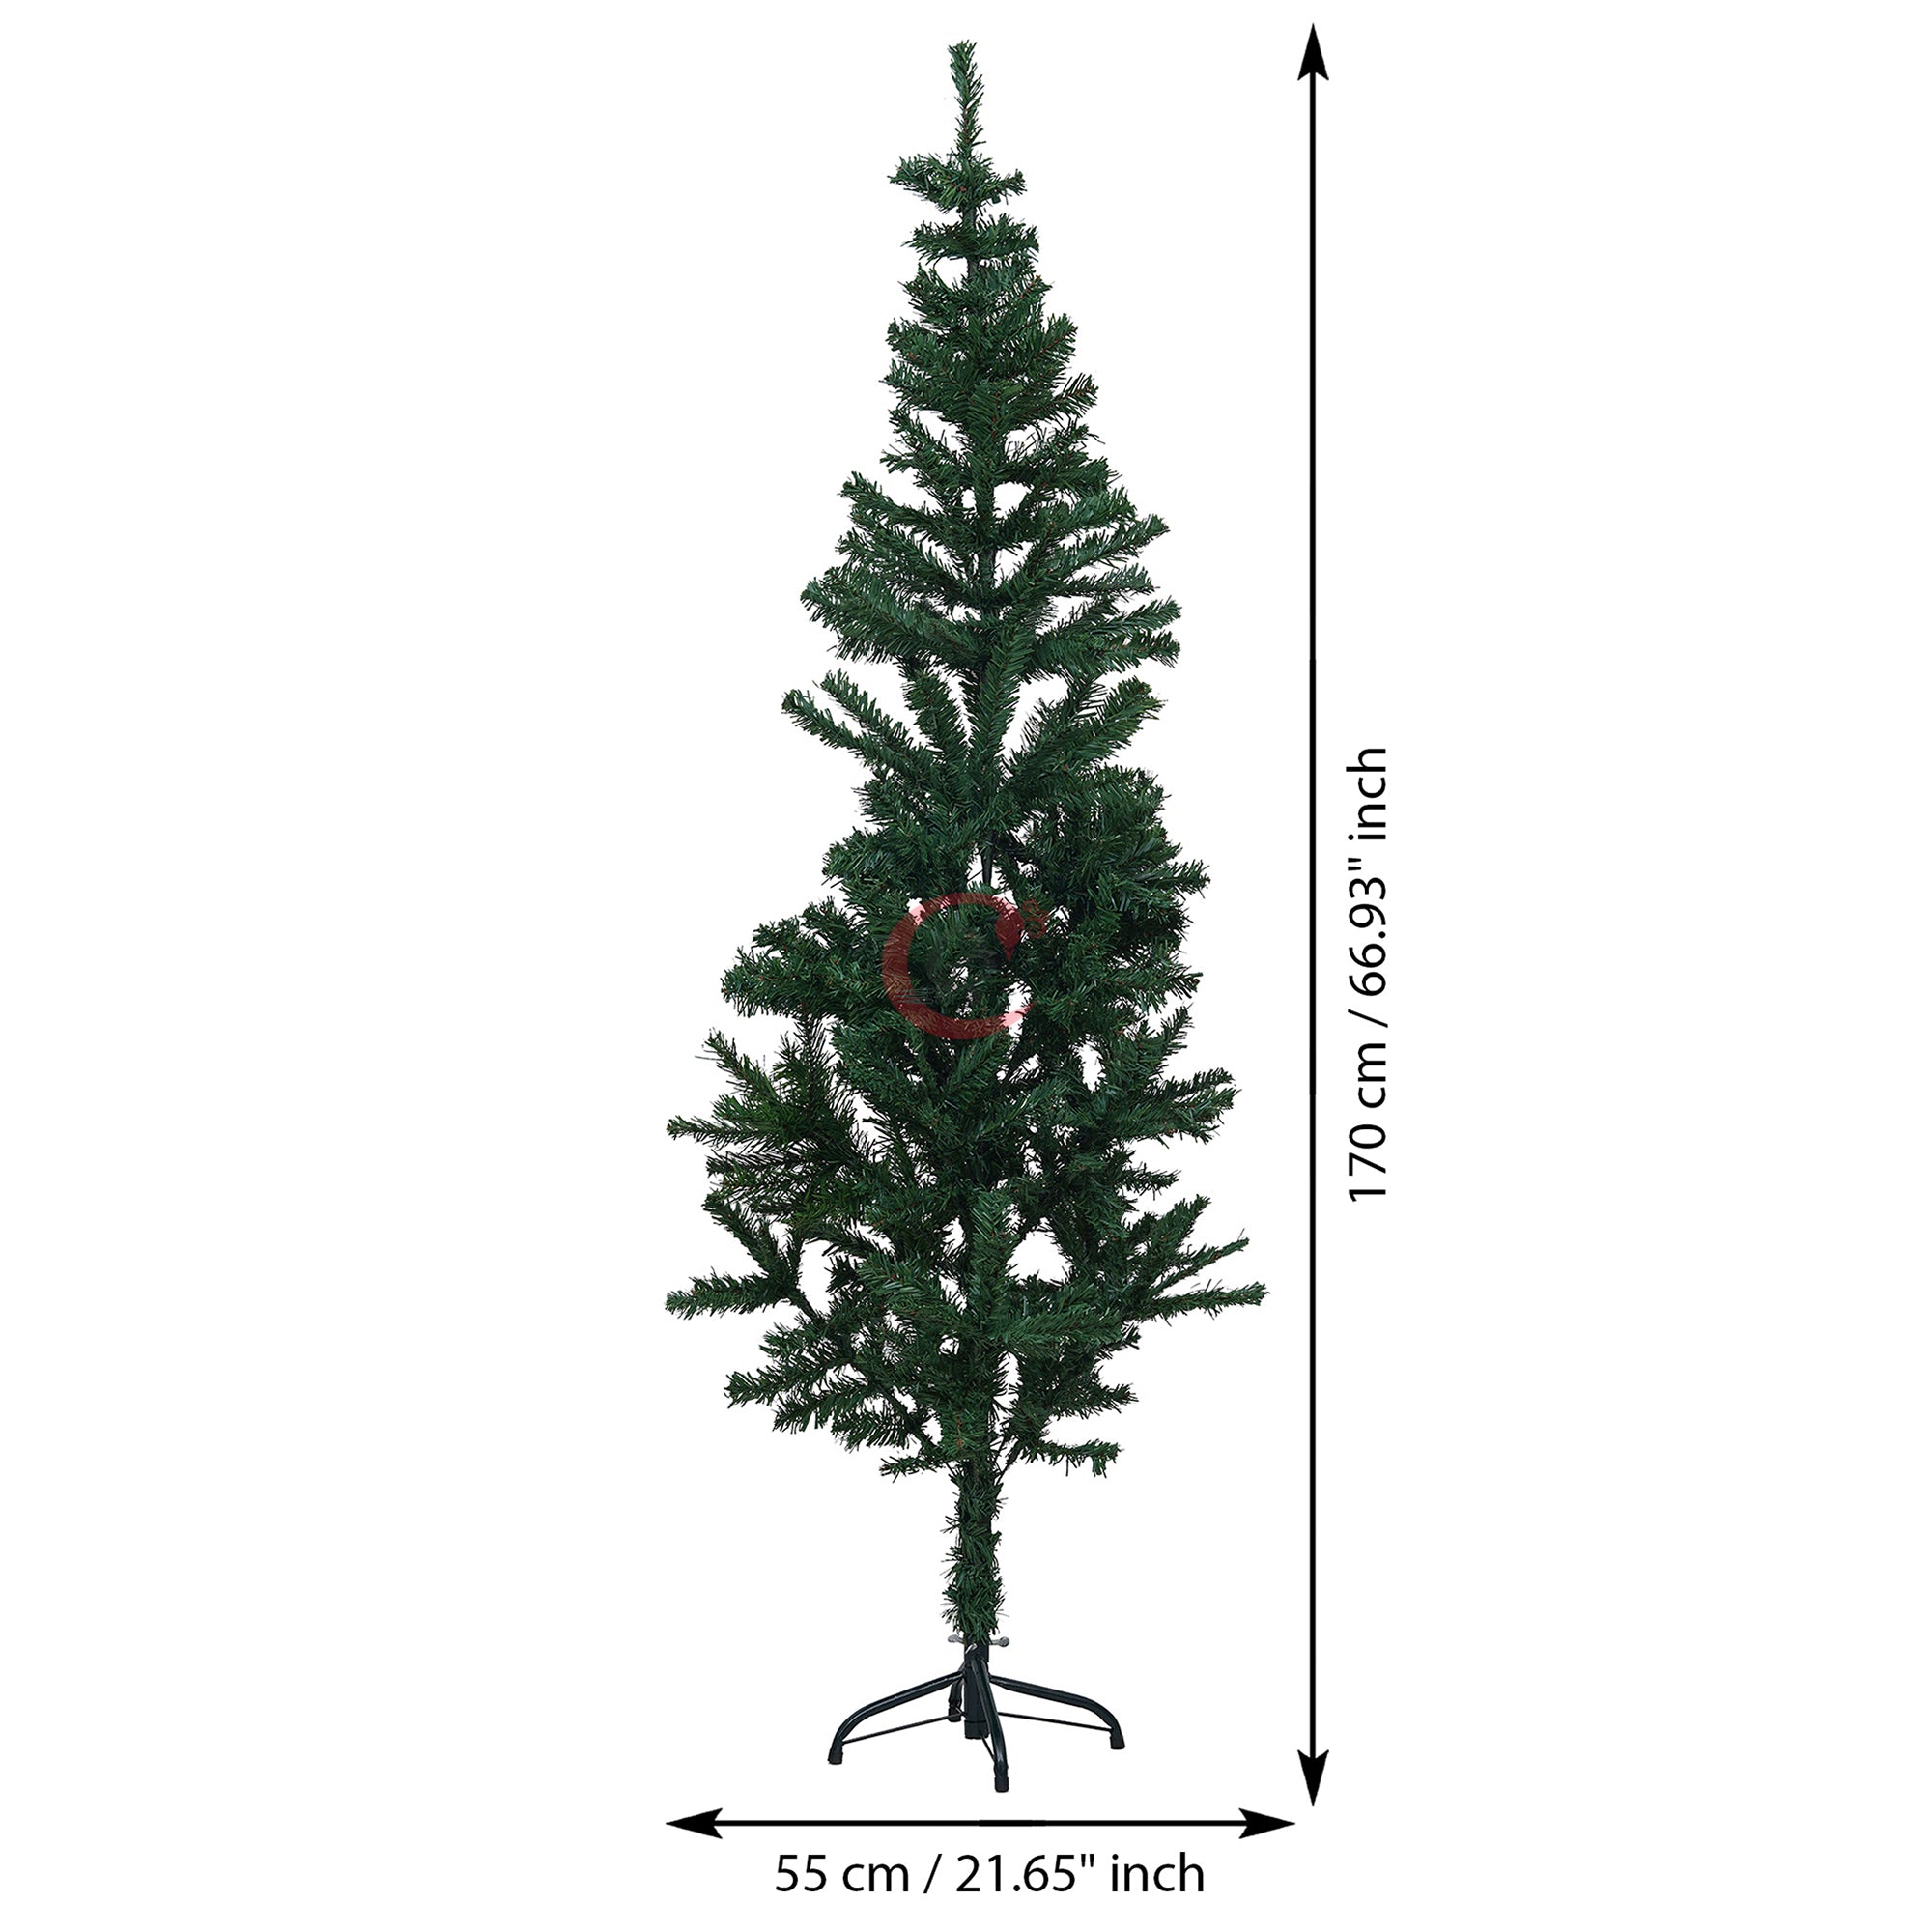 eCraftIndia 5 Feet Green Artificial Christmas Tree Xmas Pine Tree with Stand and 100 Christmas Decoration Ornaments Props - Merry Christmas Decoration Item for Home, Office, and Church 3